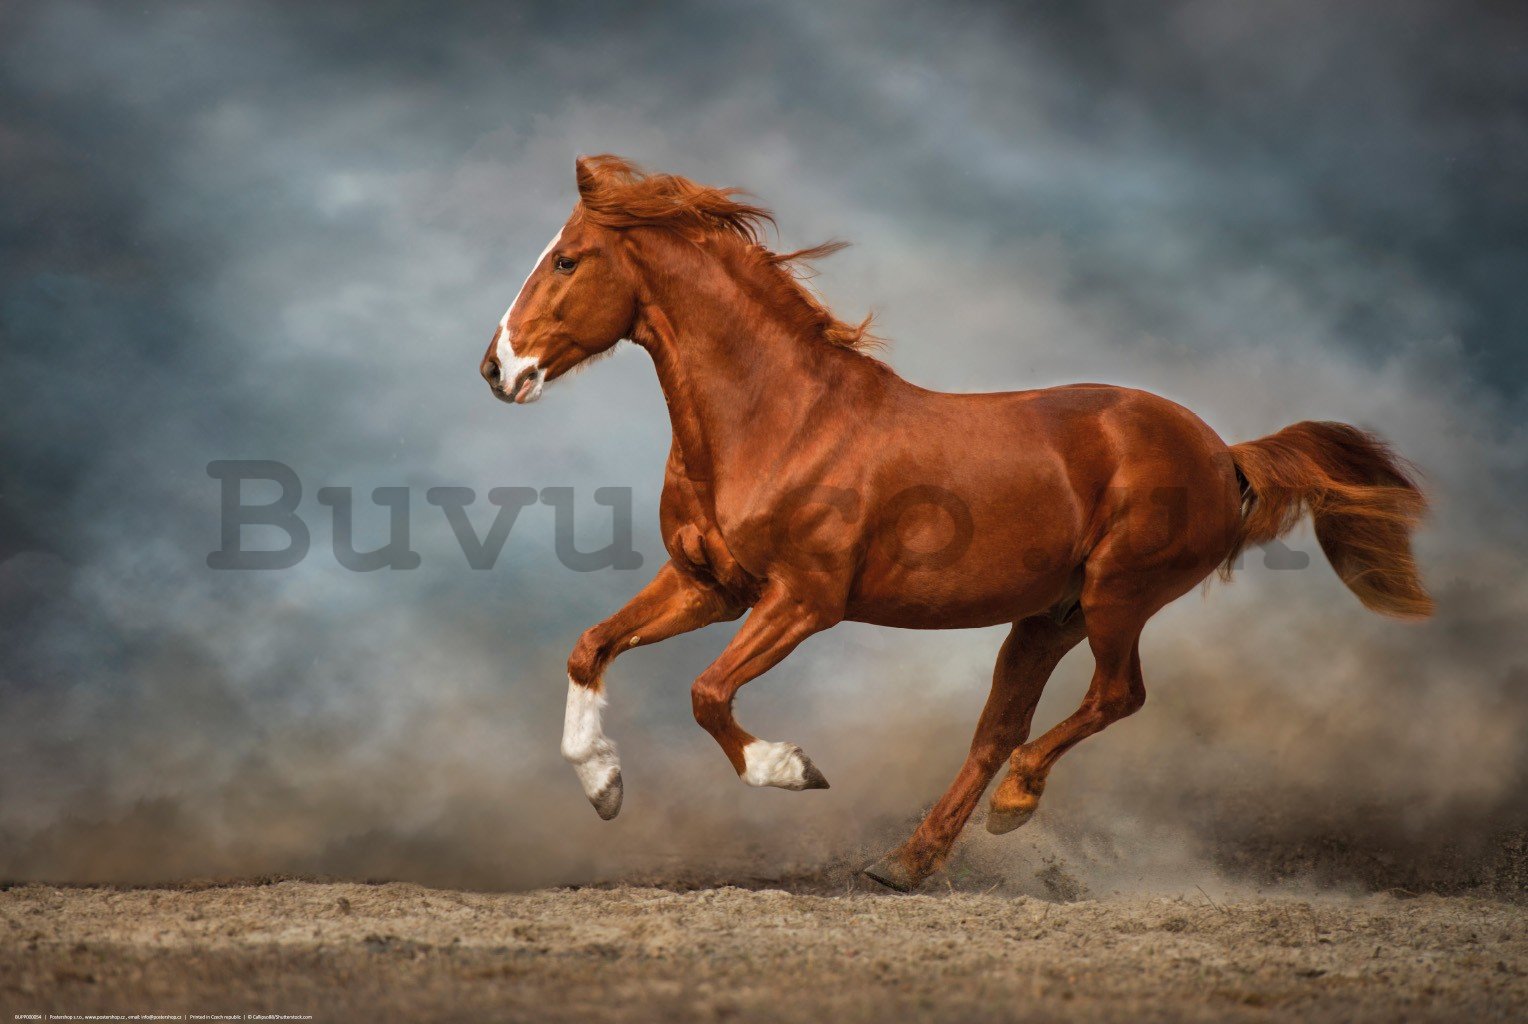 Poster: Galloping brown horse